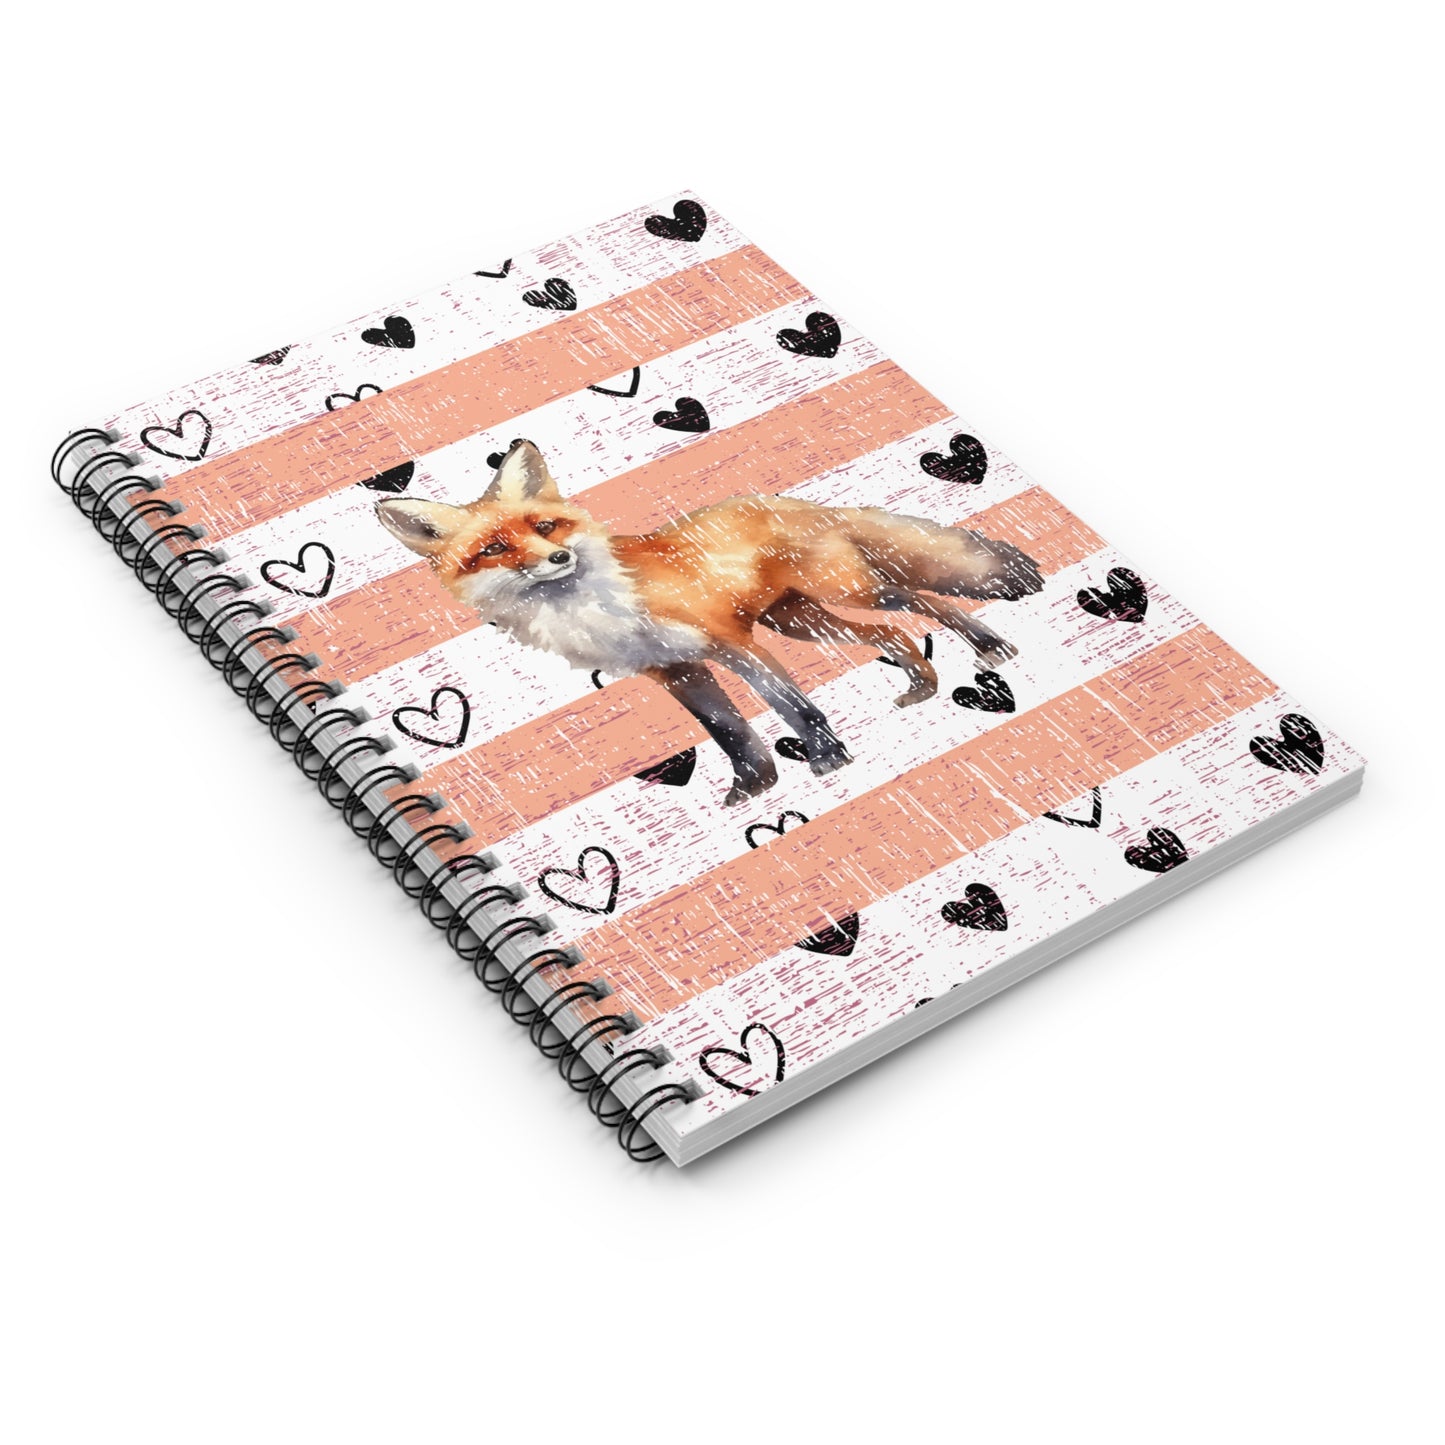 Foxy Whimsy: Ruled Spiral Notebook with Decorative Fox Cover Design - Eddy and Rita